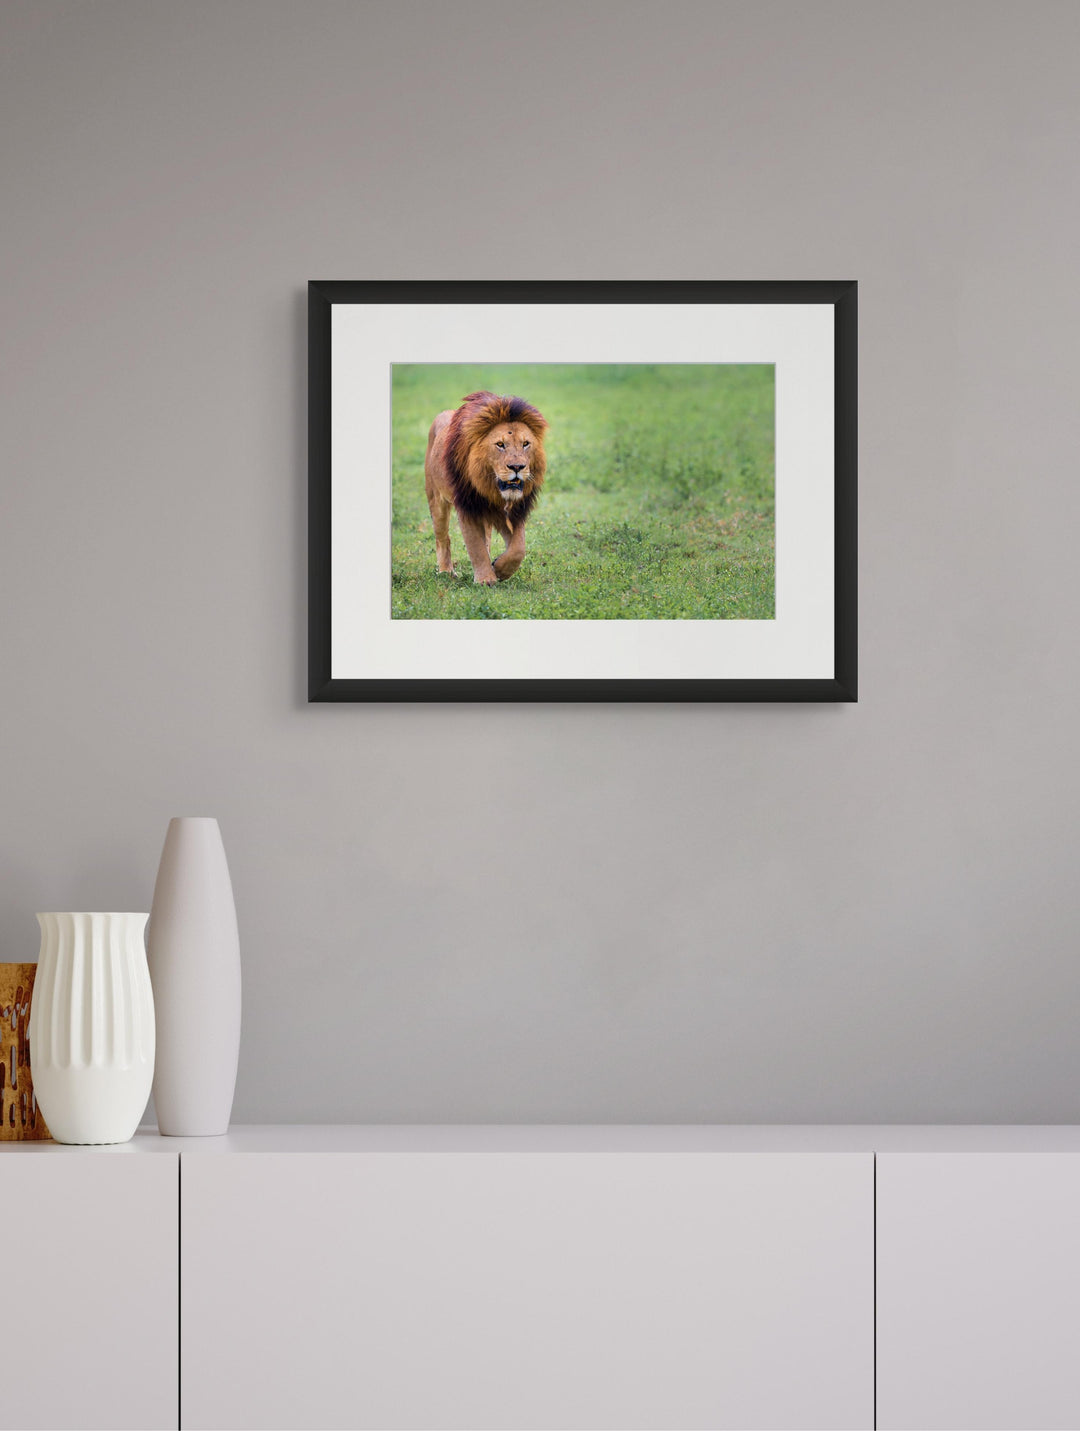 Fine art framed photograph: In Ngorongoro Crater, a lone male lion strides with regal resilience, his scarred face telling tales of survival in Africa's unforgiving landscapes. By Thomas Nicholson